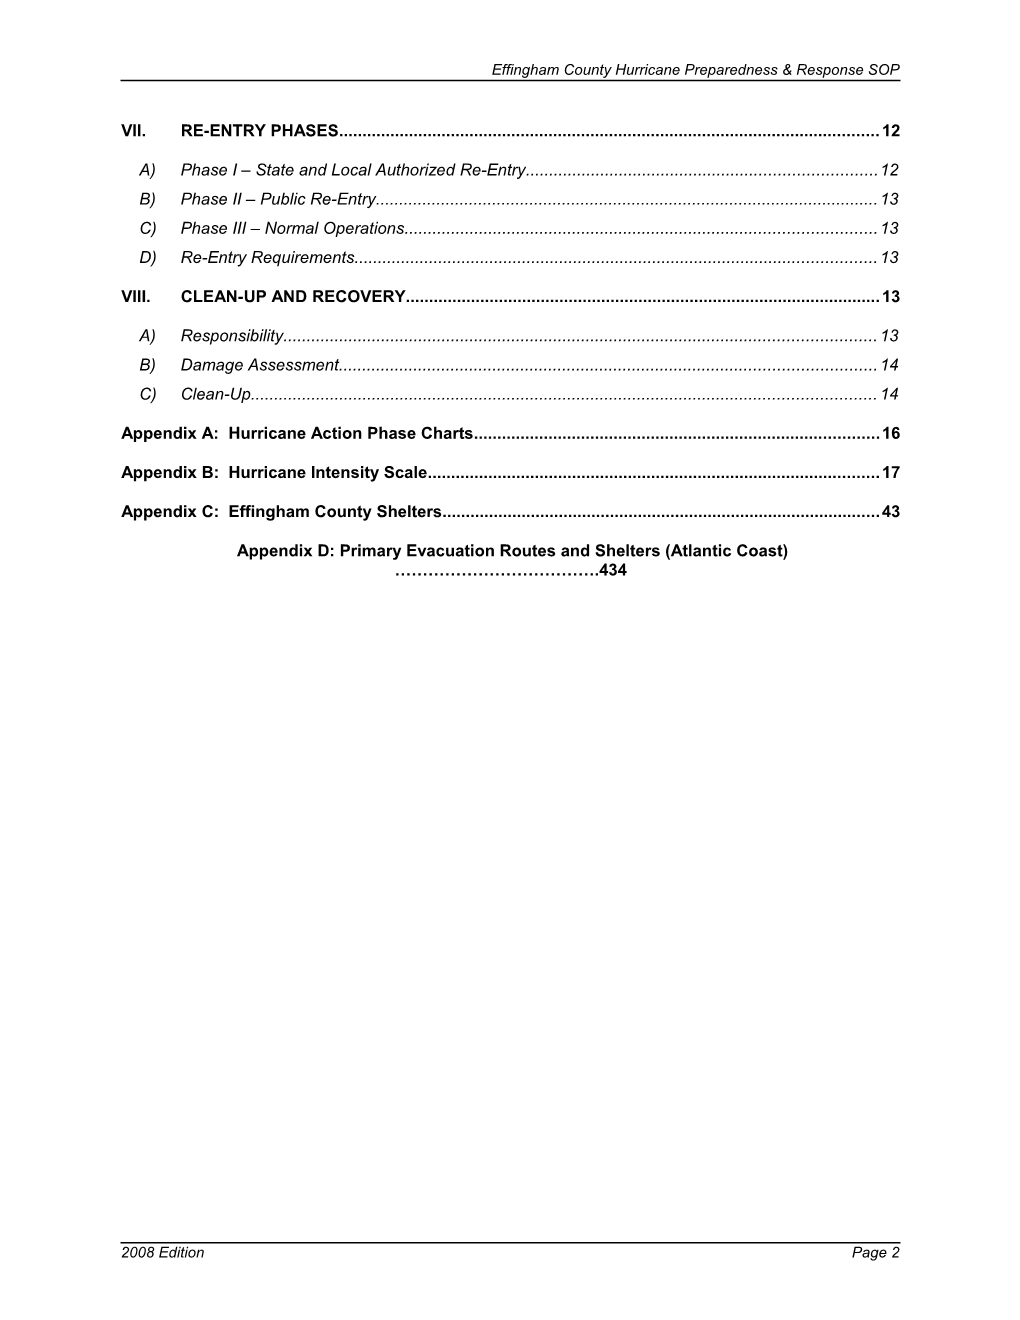 Table of Contents s283